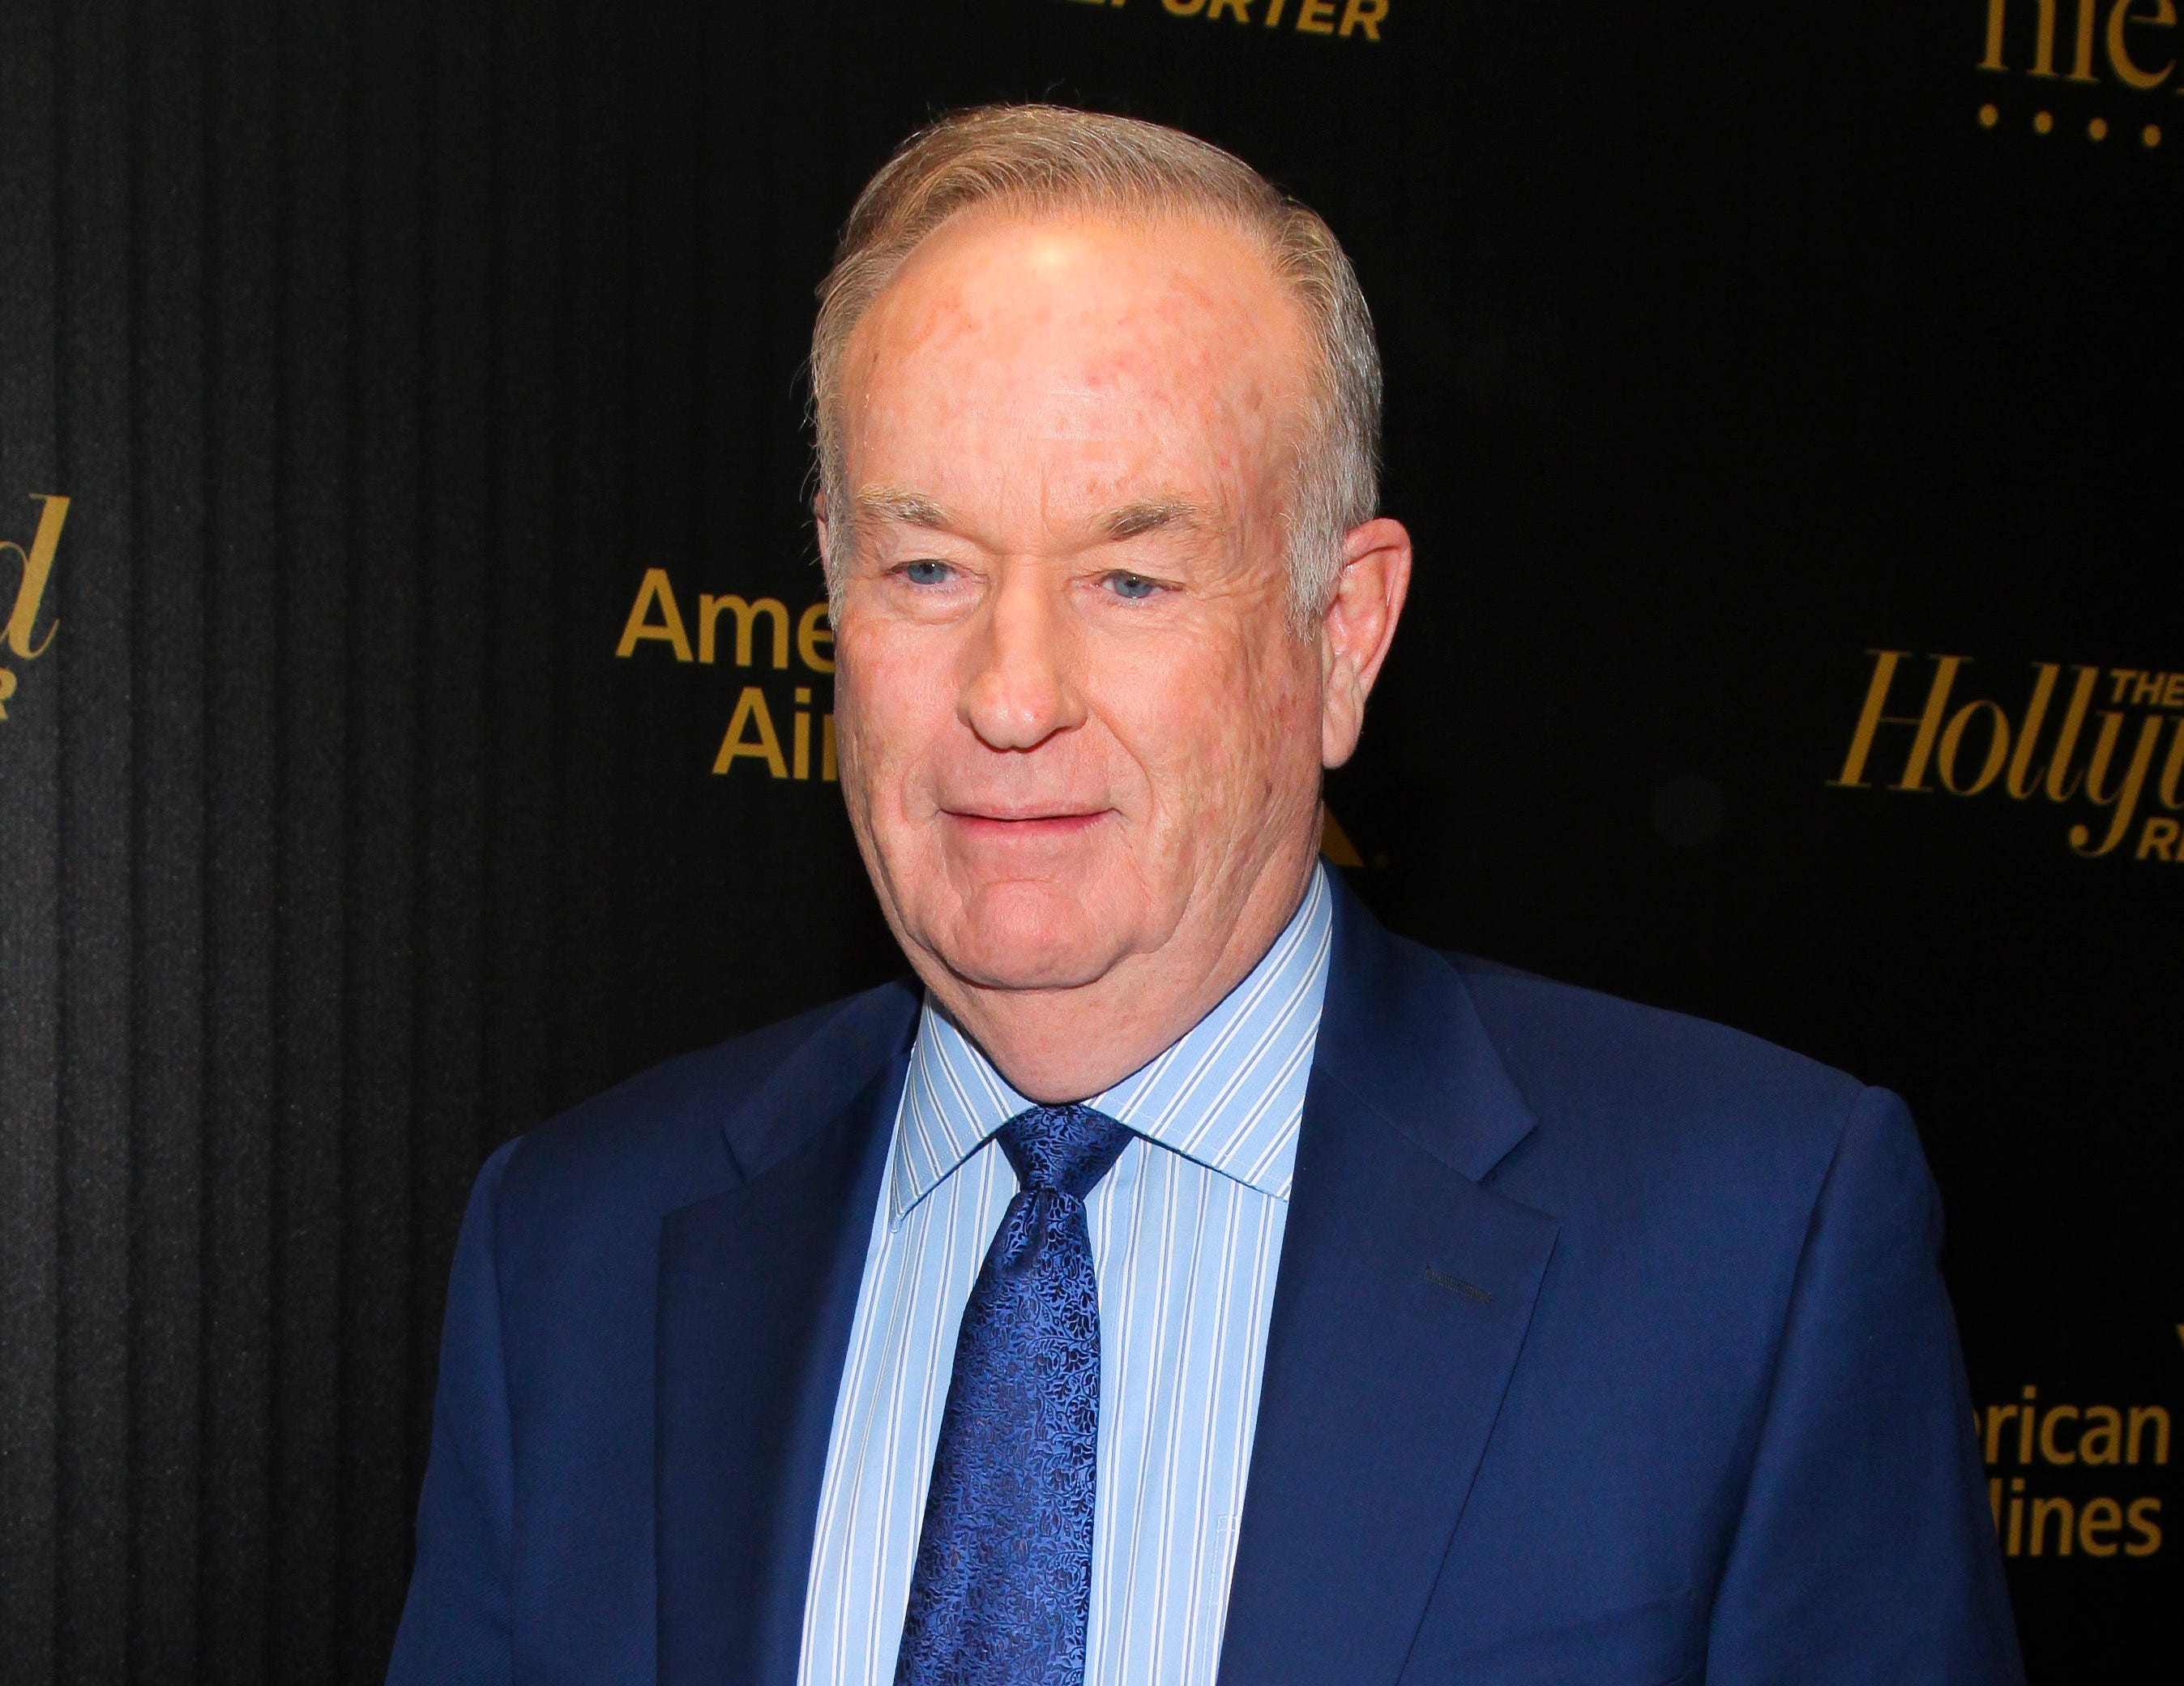 Bill O'Reilly returns with new podcast Monday